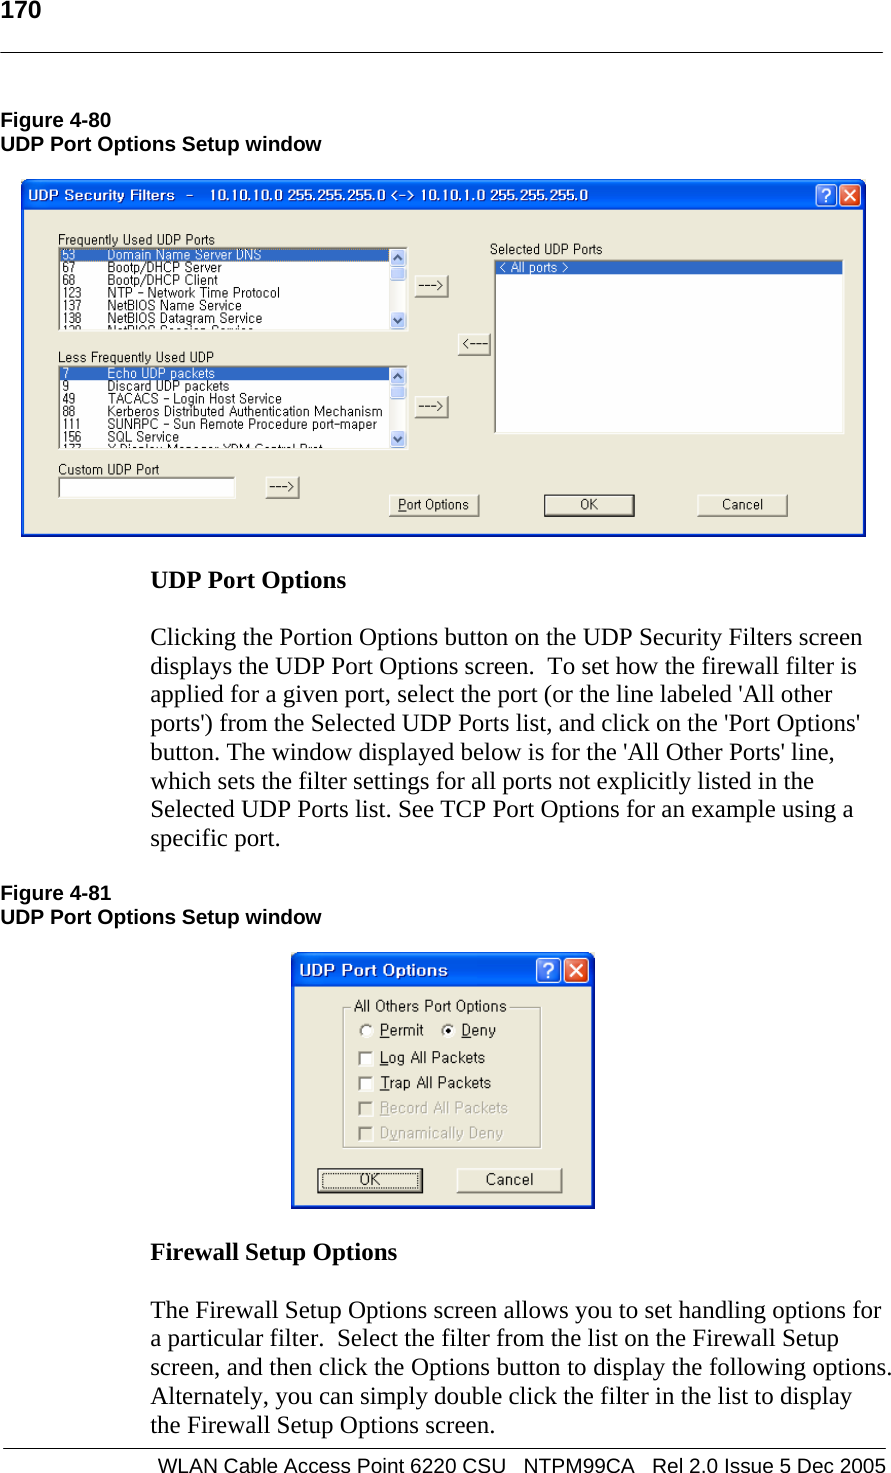   170  WLAN Cable Access Point 6220 CSU   NTPM99CA   Rel 2.0 Issue 5 Dec 2005 Figure 4-80 UDP Port Options Setup window    UDP Port Options   Clicking the Portion Options button on the UDP Security Filters screen displays the UDP Port Options screen.  To set how the firewall filter is applied for a given port, select the port (or the line labeled &apos;All other ports&apos;) from the Selected UDP Ports list, and click on the &apos;Port Options&apos; button. The window displayed below is for the &apos;All Other Ports&apos; line, which sets the filter settings for all ports not explicitly listed in the Selected UDP Ports list. See TCP Port Options for an example using a specific port.  Figure 4-81 UDP Port Options Setup window    Firewall Setup Options   The Firewall Setup Options screen allows you to set handling options for a particular filter.  Select the filter from the list on the Firewall Setup screen, and then click the Options button to display the following options. Alternately, you can simply double click the filter in the list to display the Firewall Setup Options screen. 